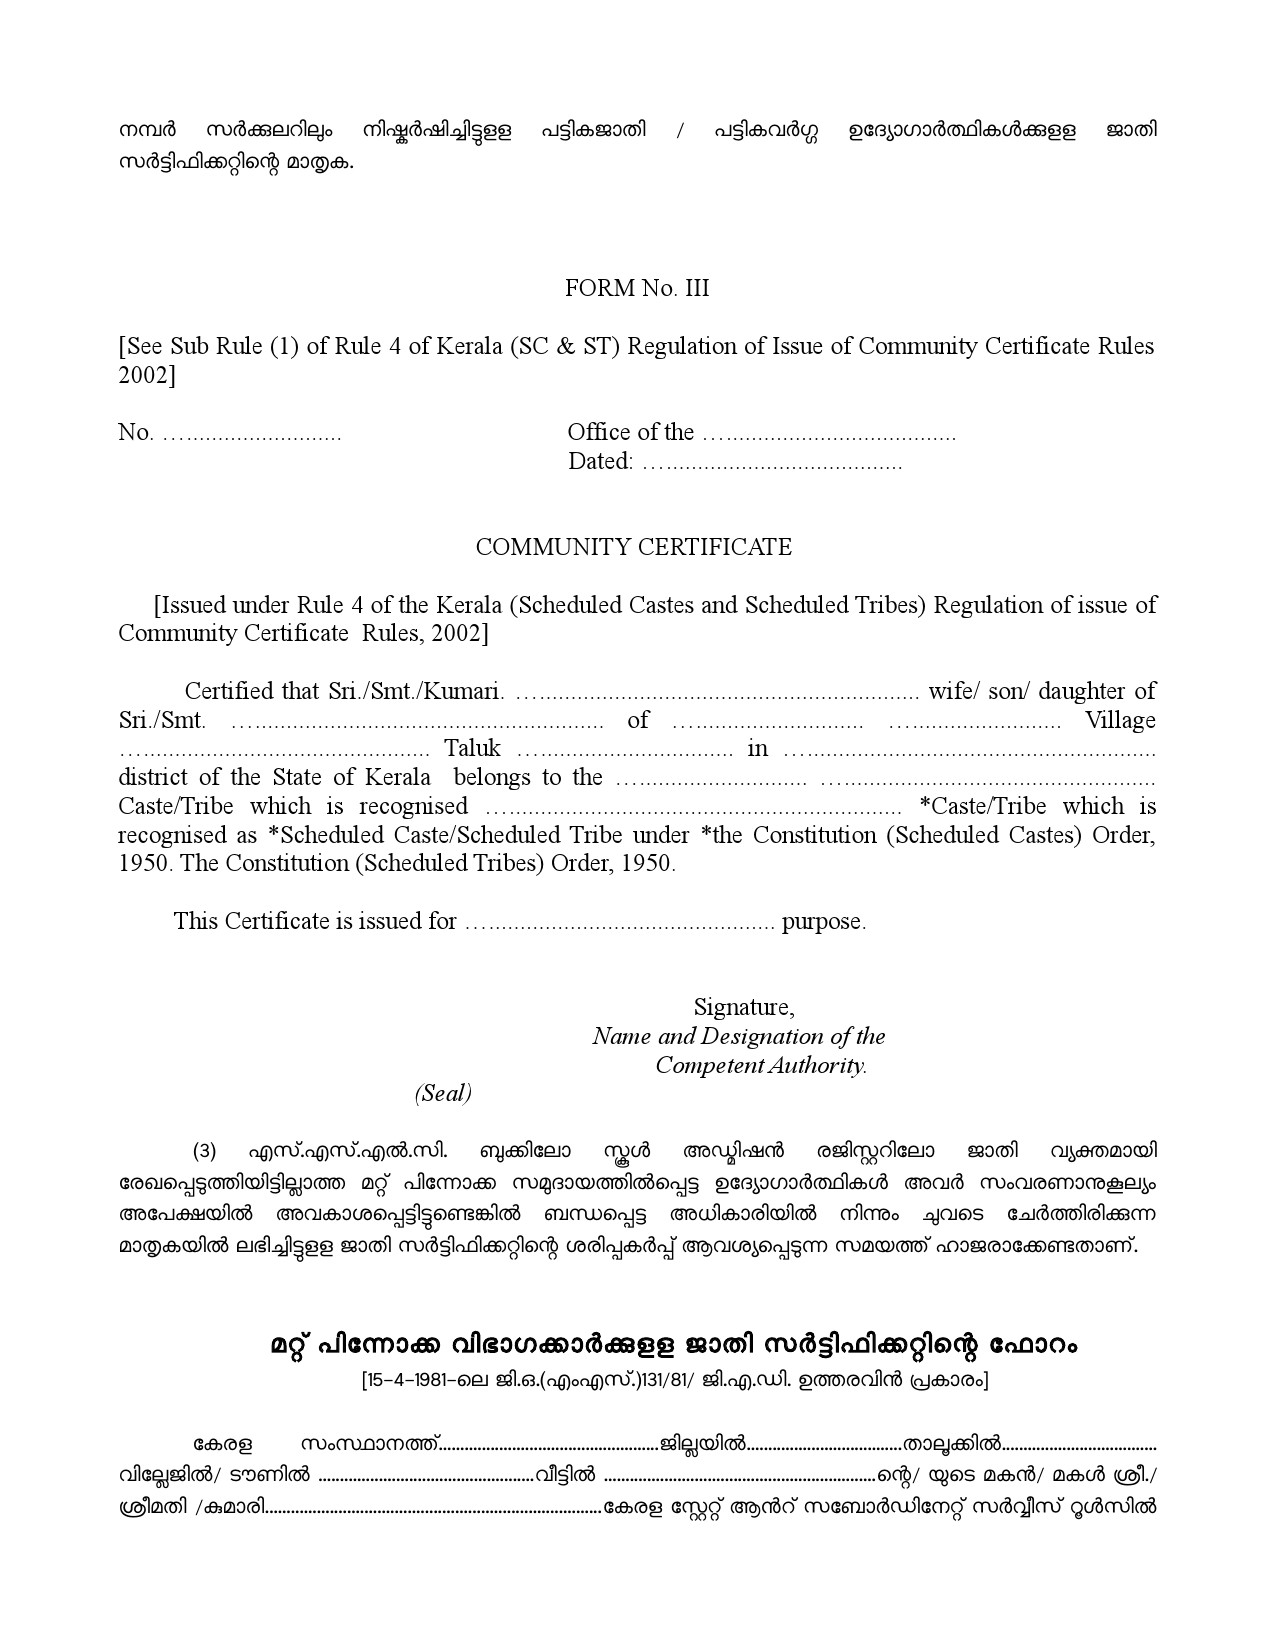 General Conditions and Certificate Formats in Malayalam - Notification Image 15